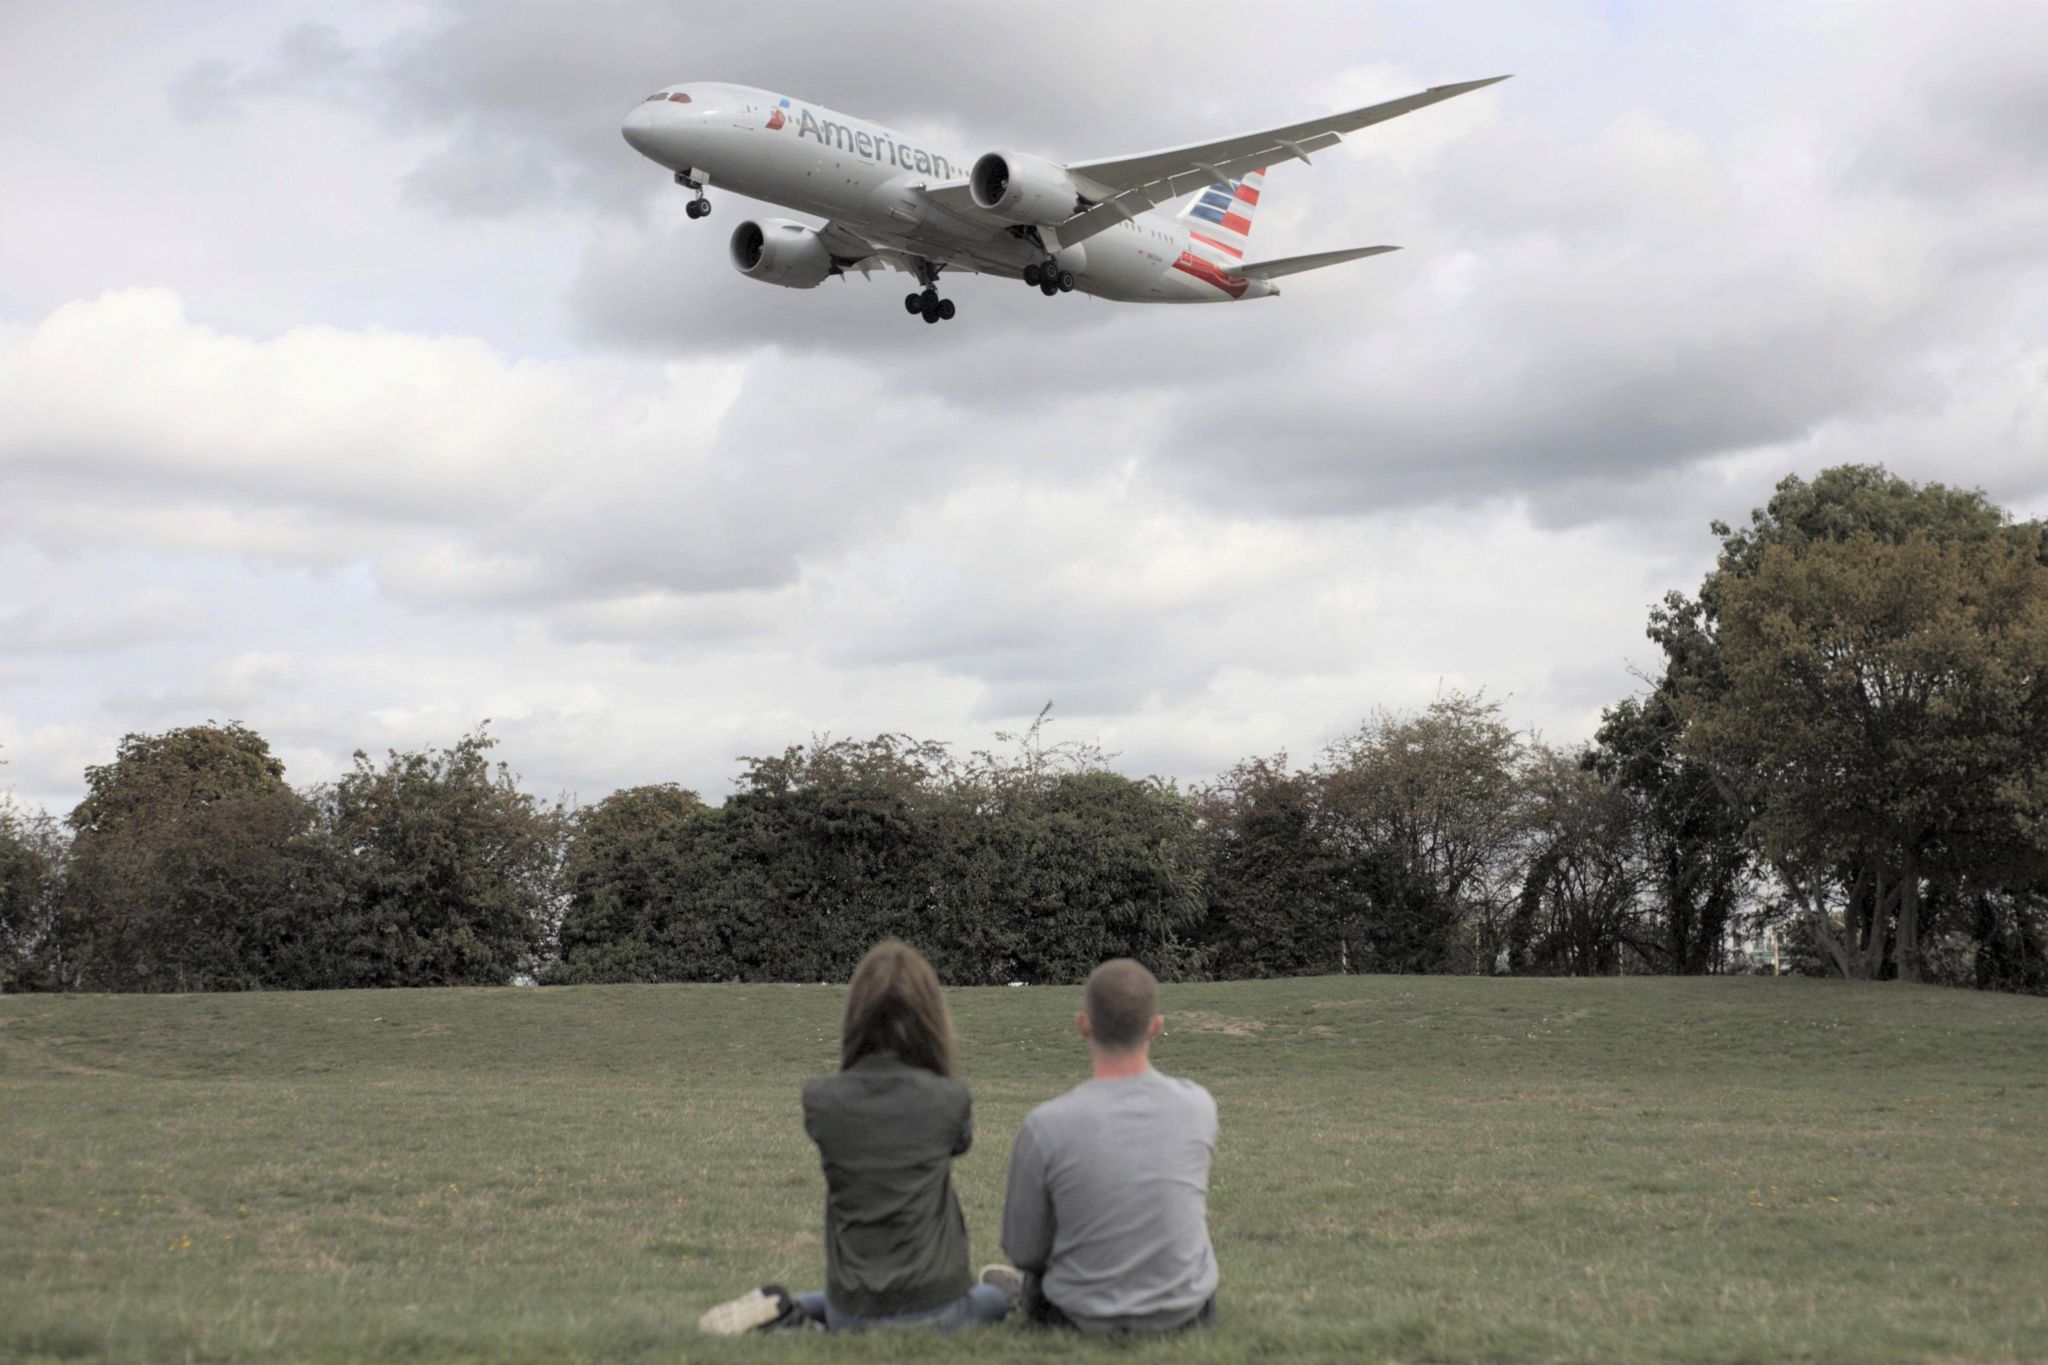 Two people in a park watch American Airlines flight land